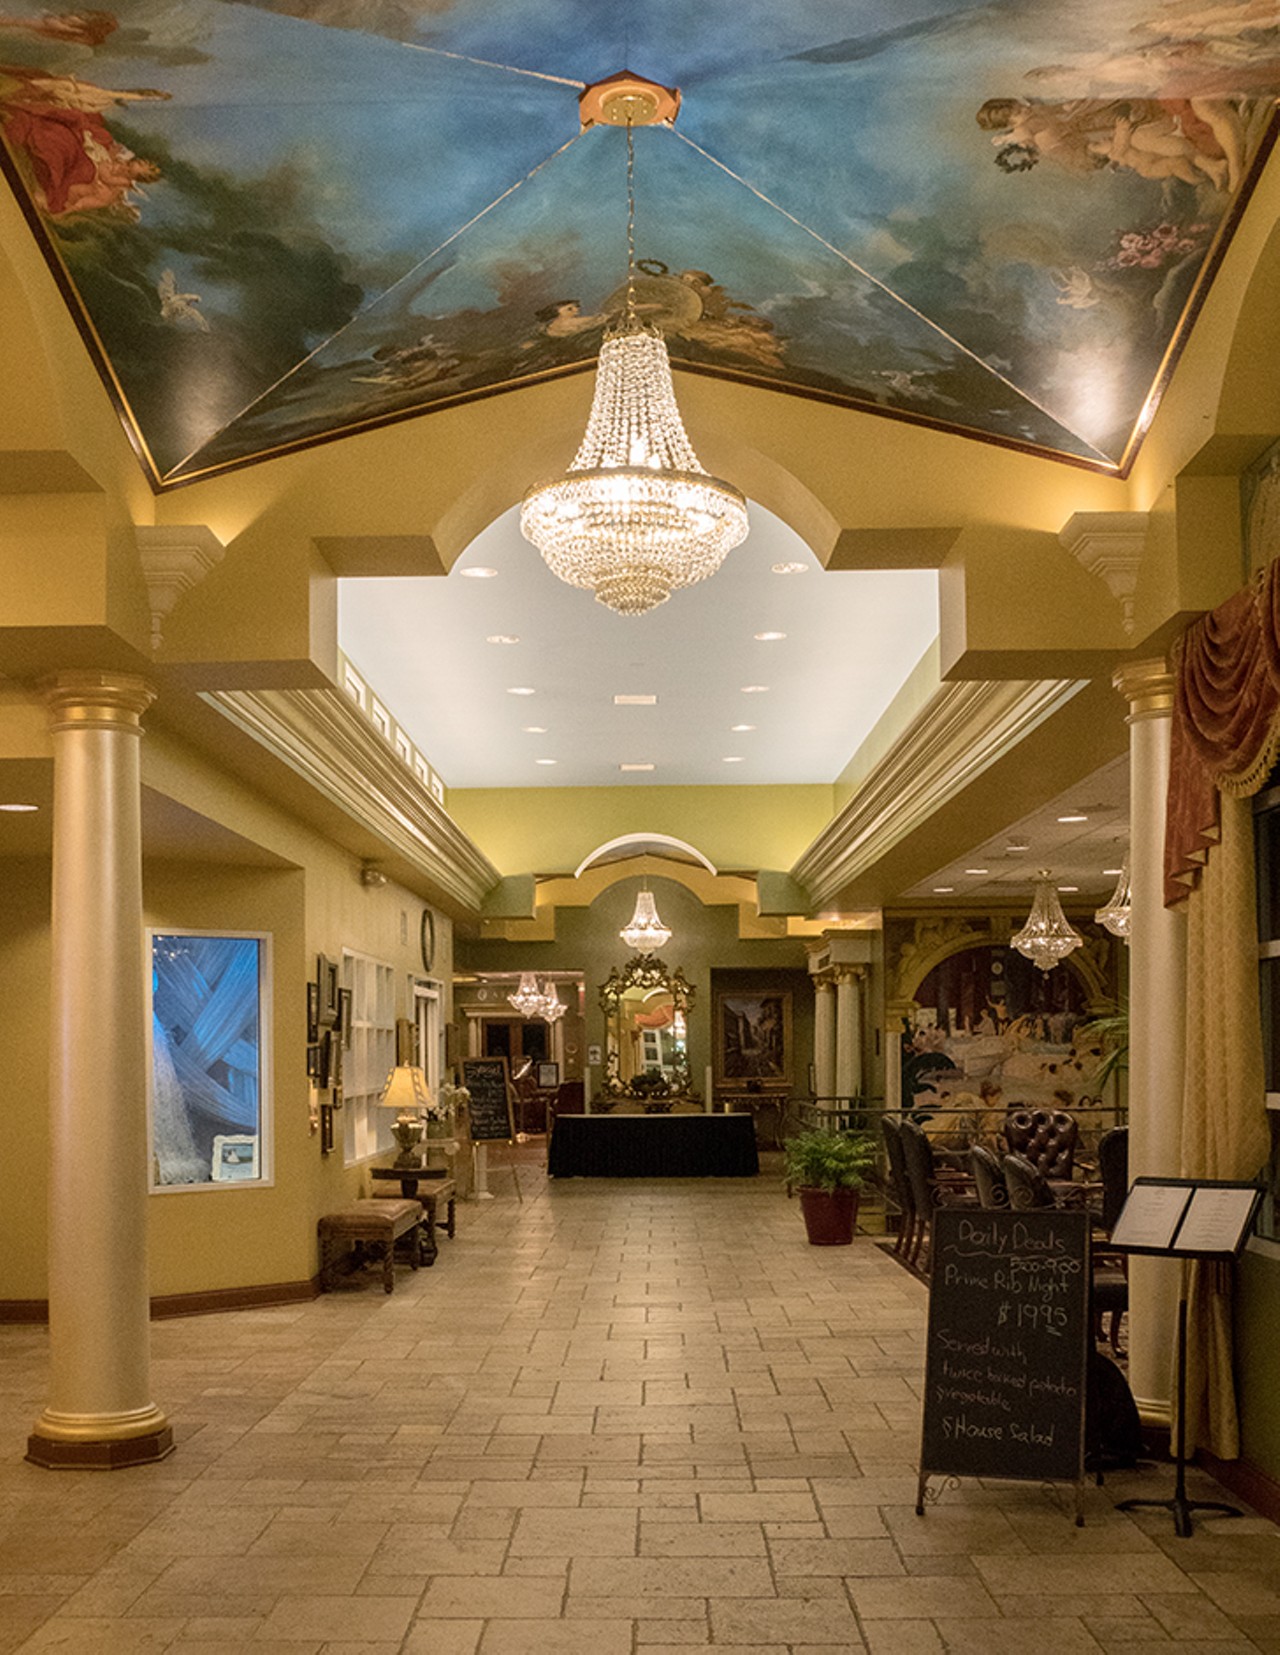 Paintings on the walls and ceiling of the Safety Harbor spa